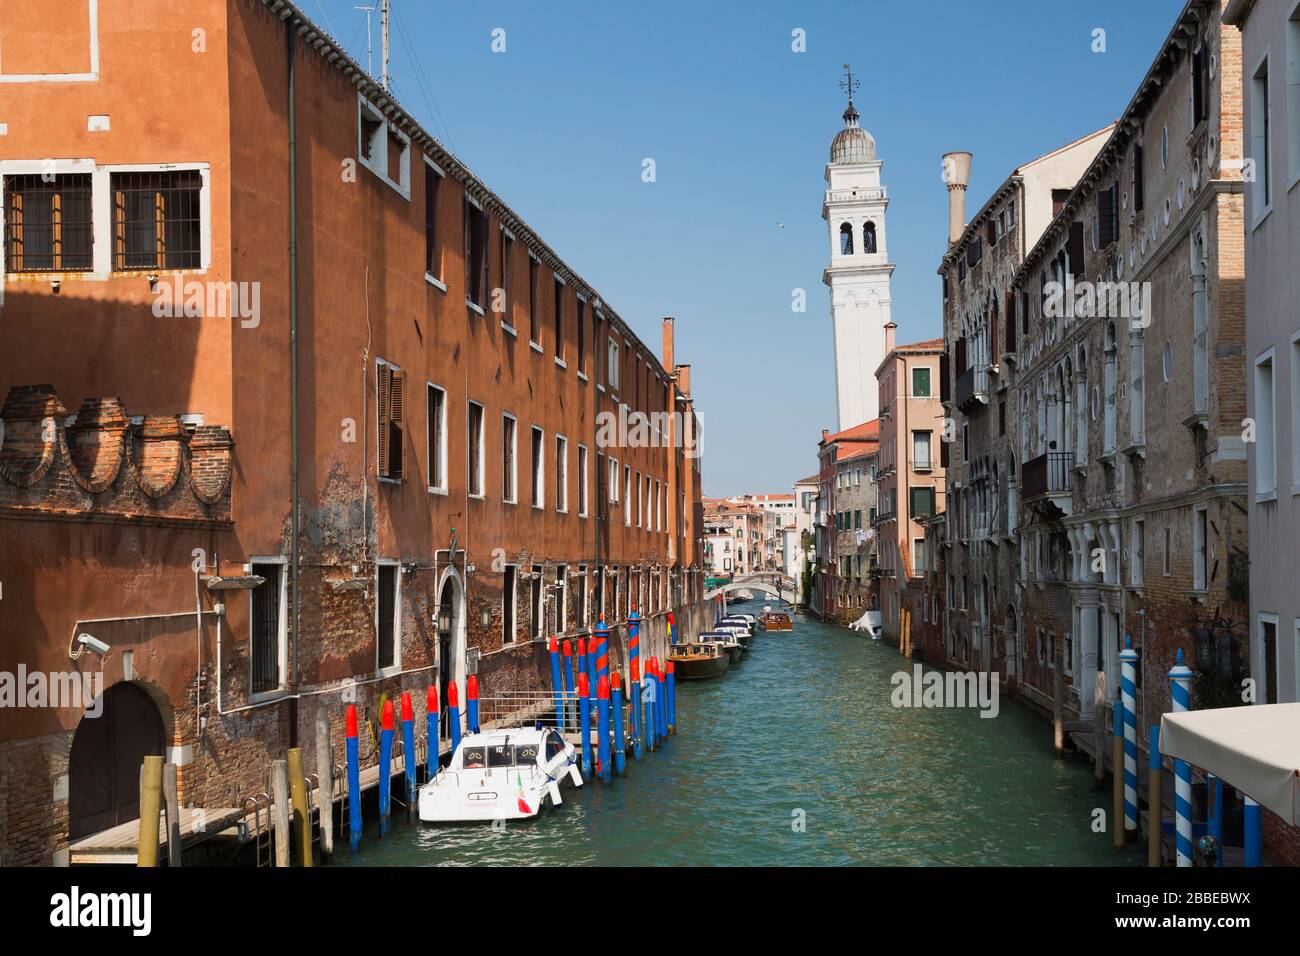 Moored boats and water taxi on narrow canal and old architectural style residential buildings, leaning church bell tower, San Marco, Venice, Veneto, Italy Stock Photo